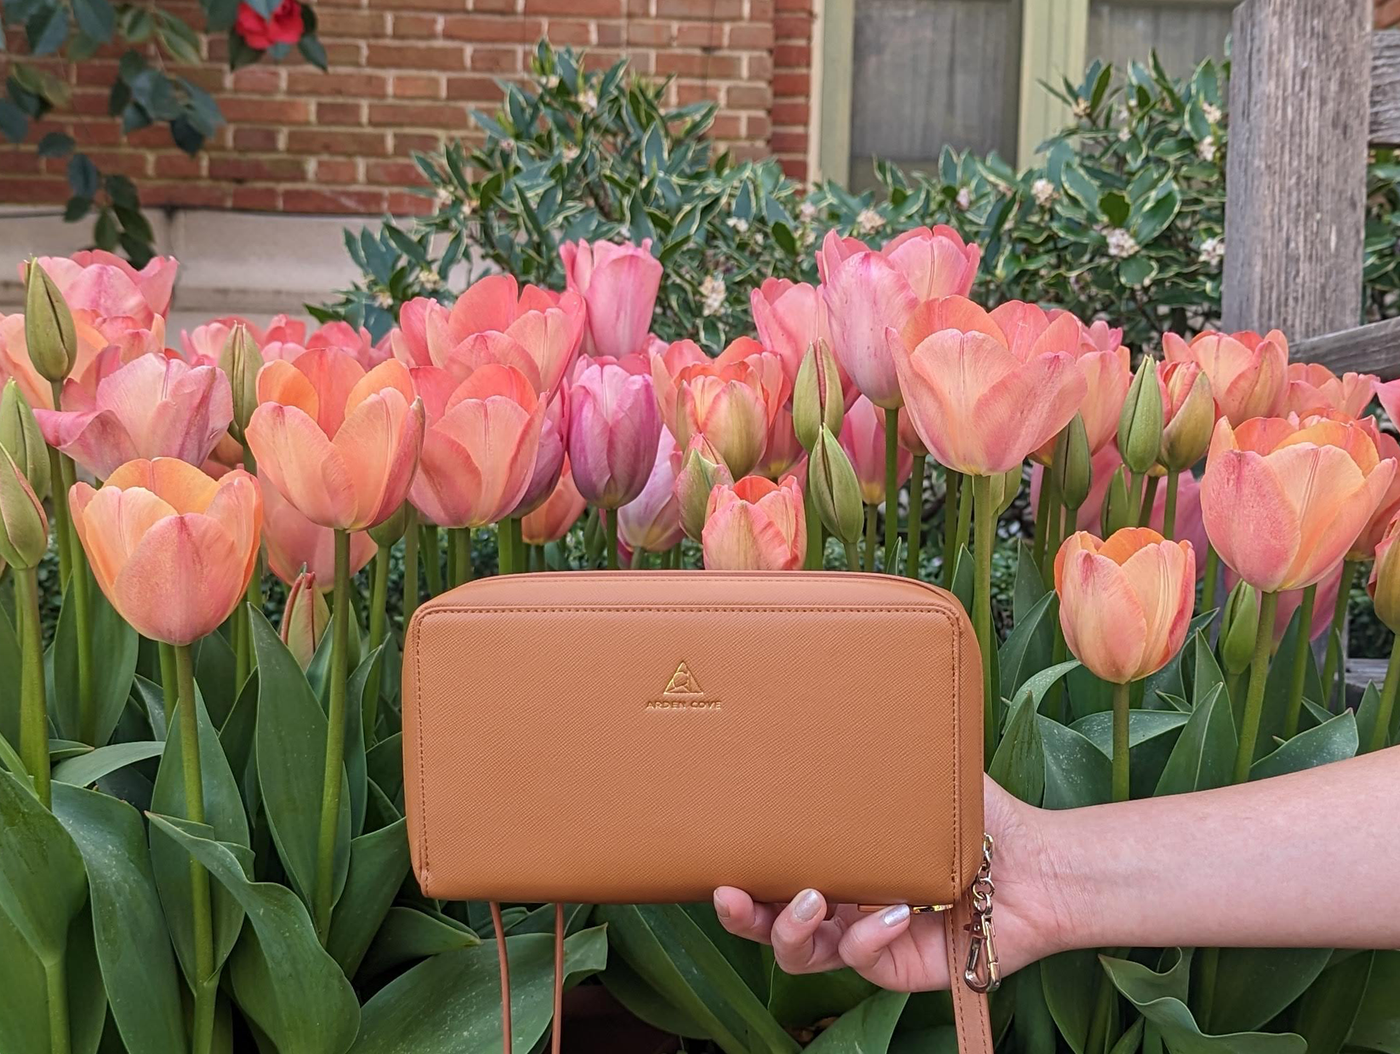 Filoli Courtyard, with Anti-theft Water-resistant Marina Grande Wallet